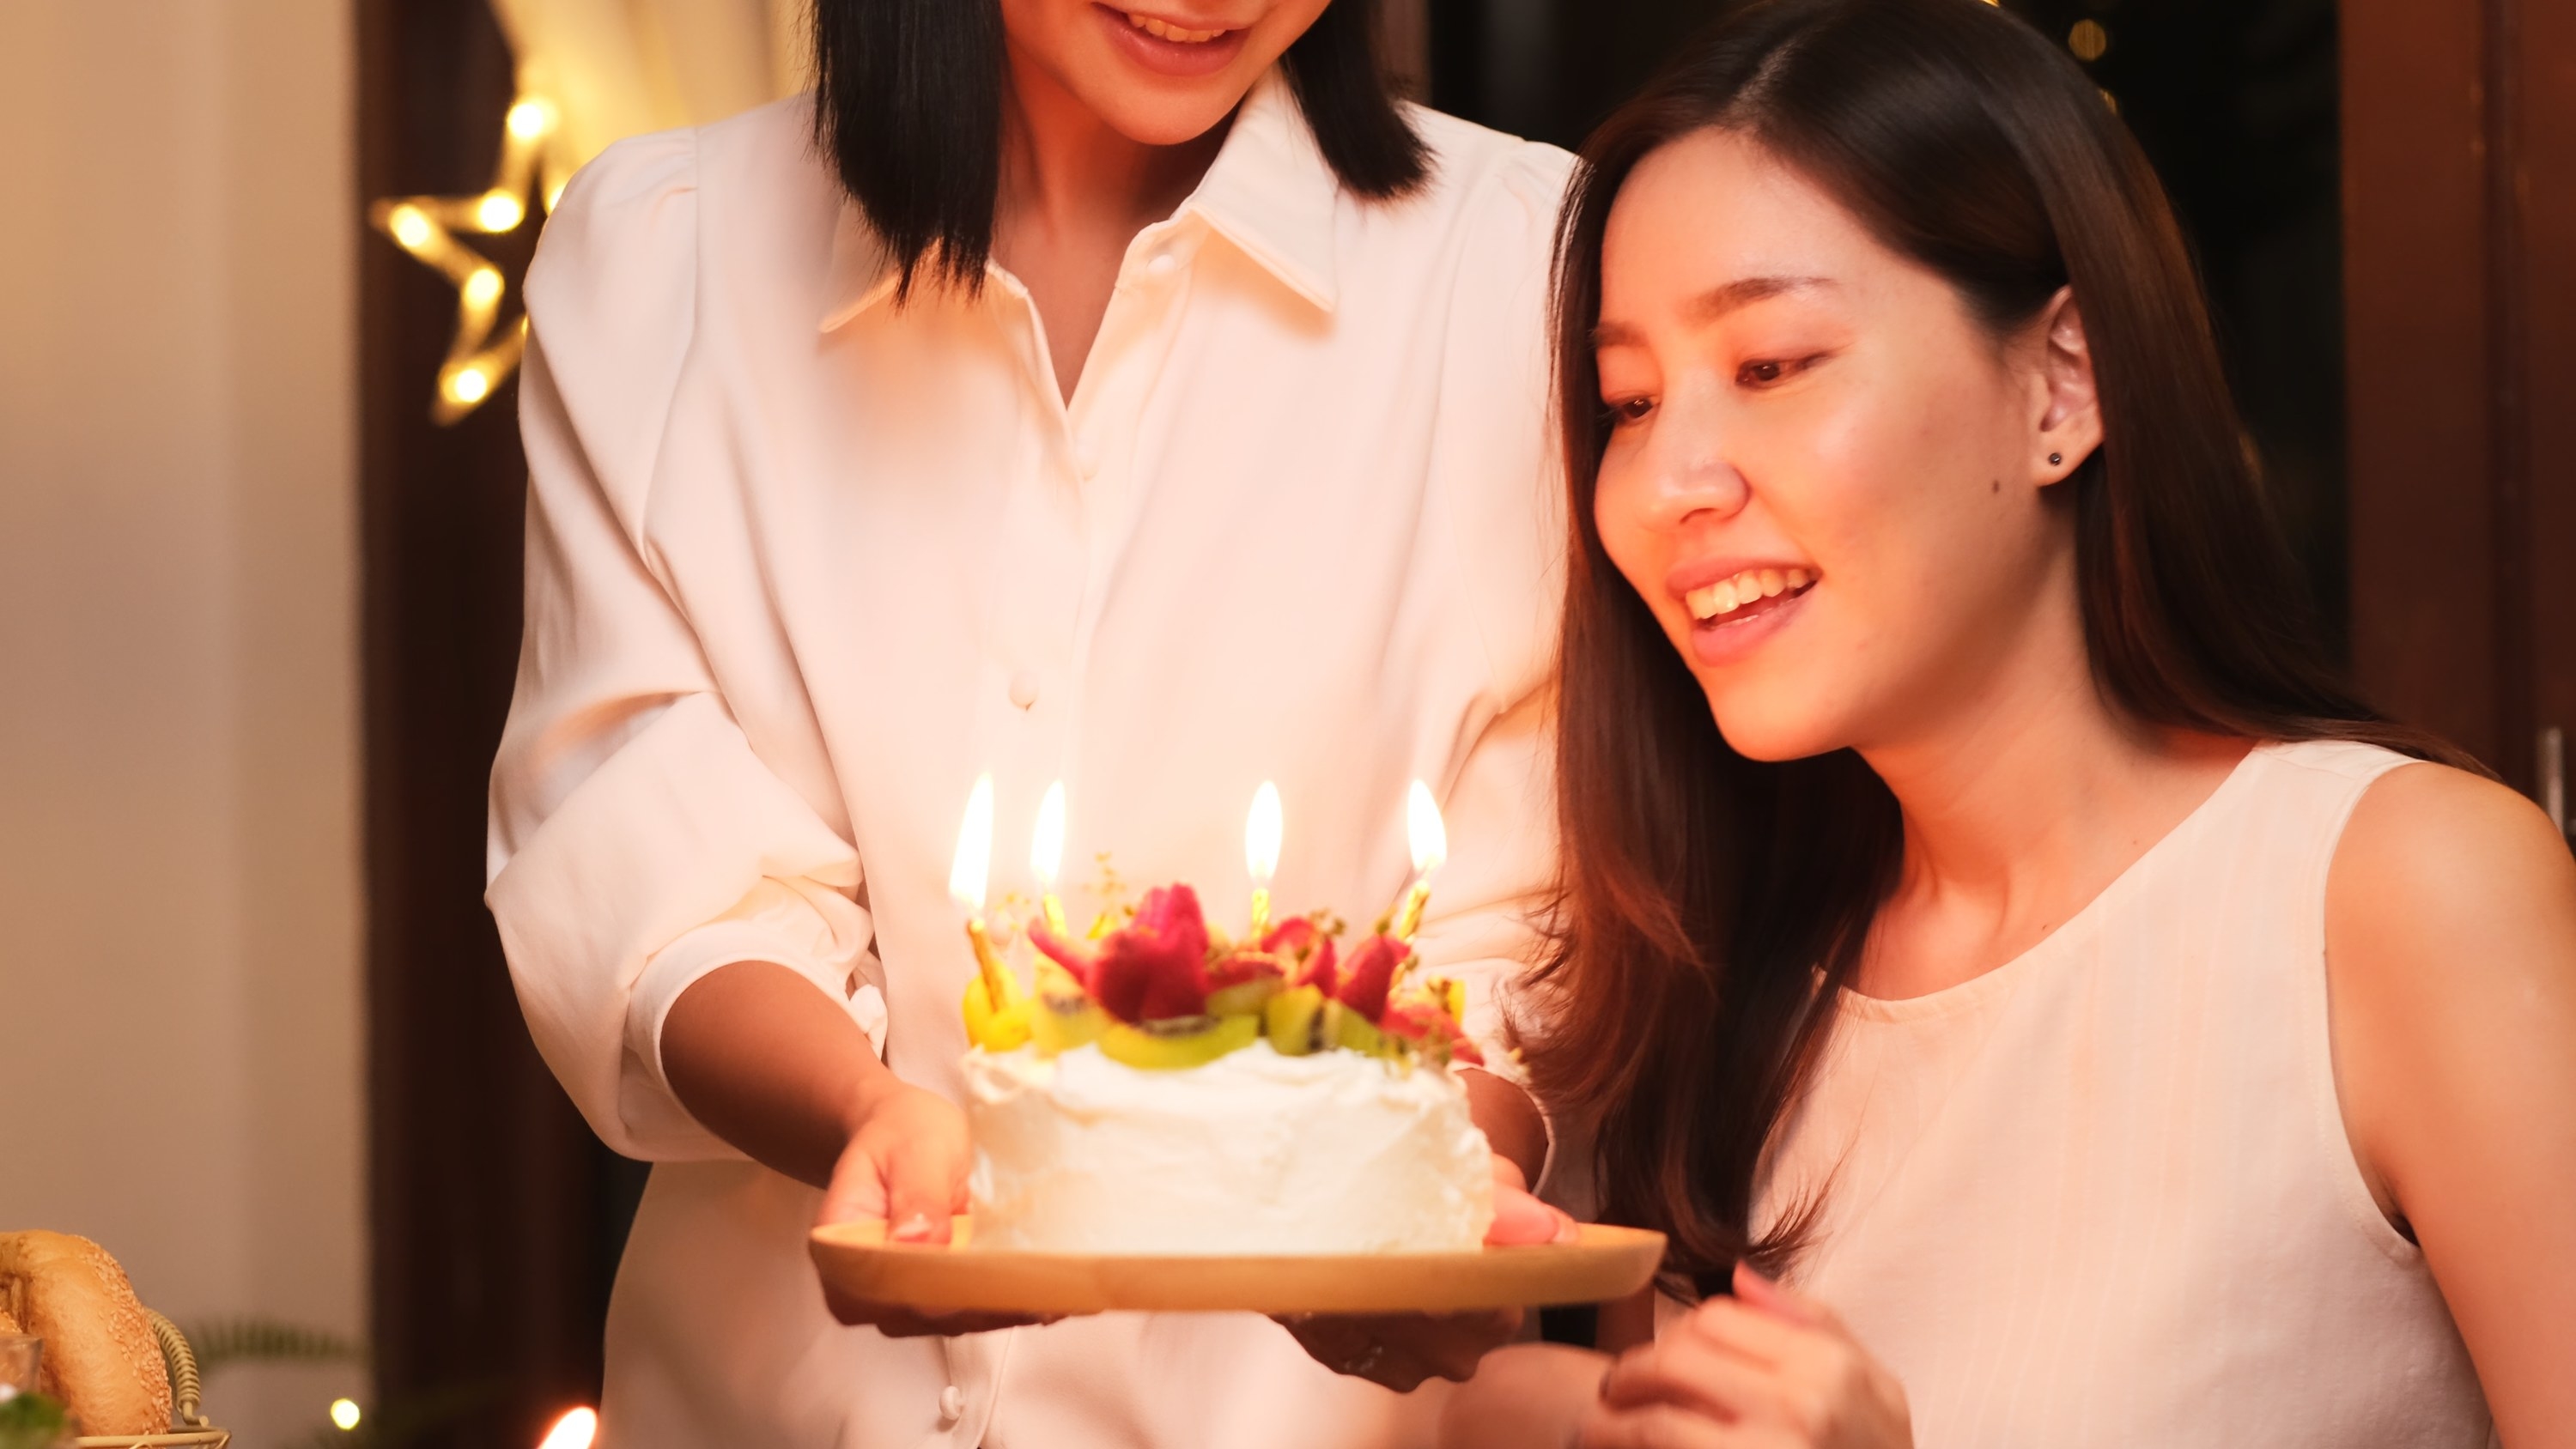 A girl blowing out candles on a birthday cake